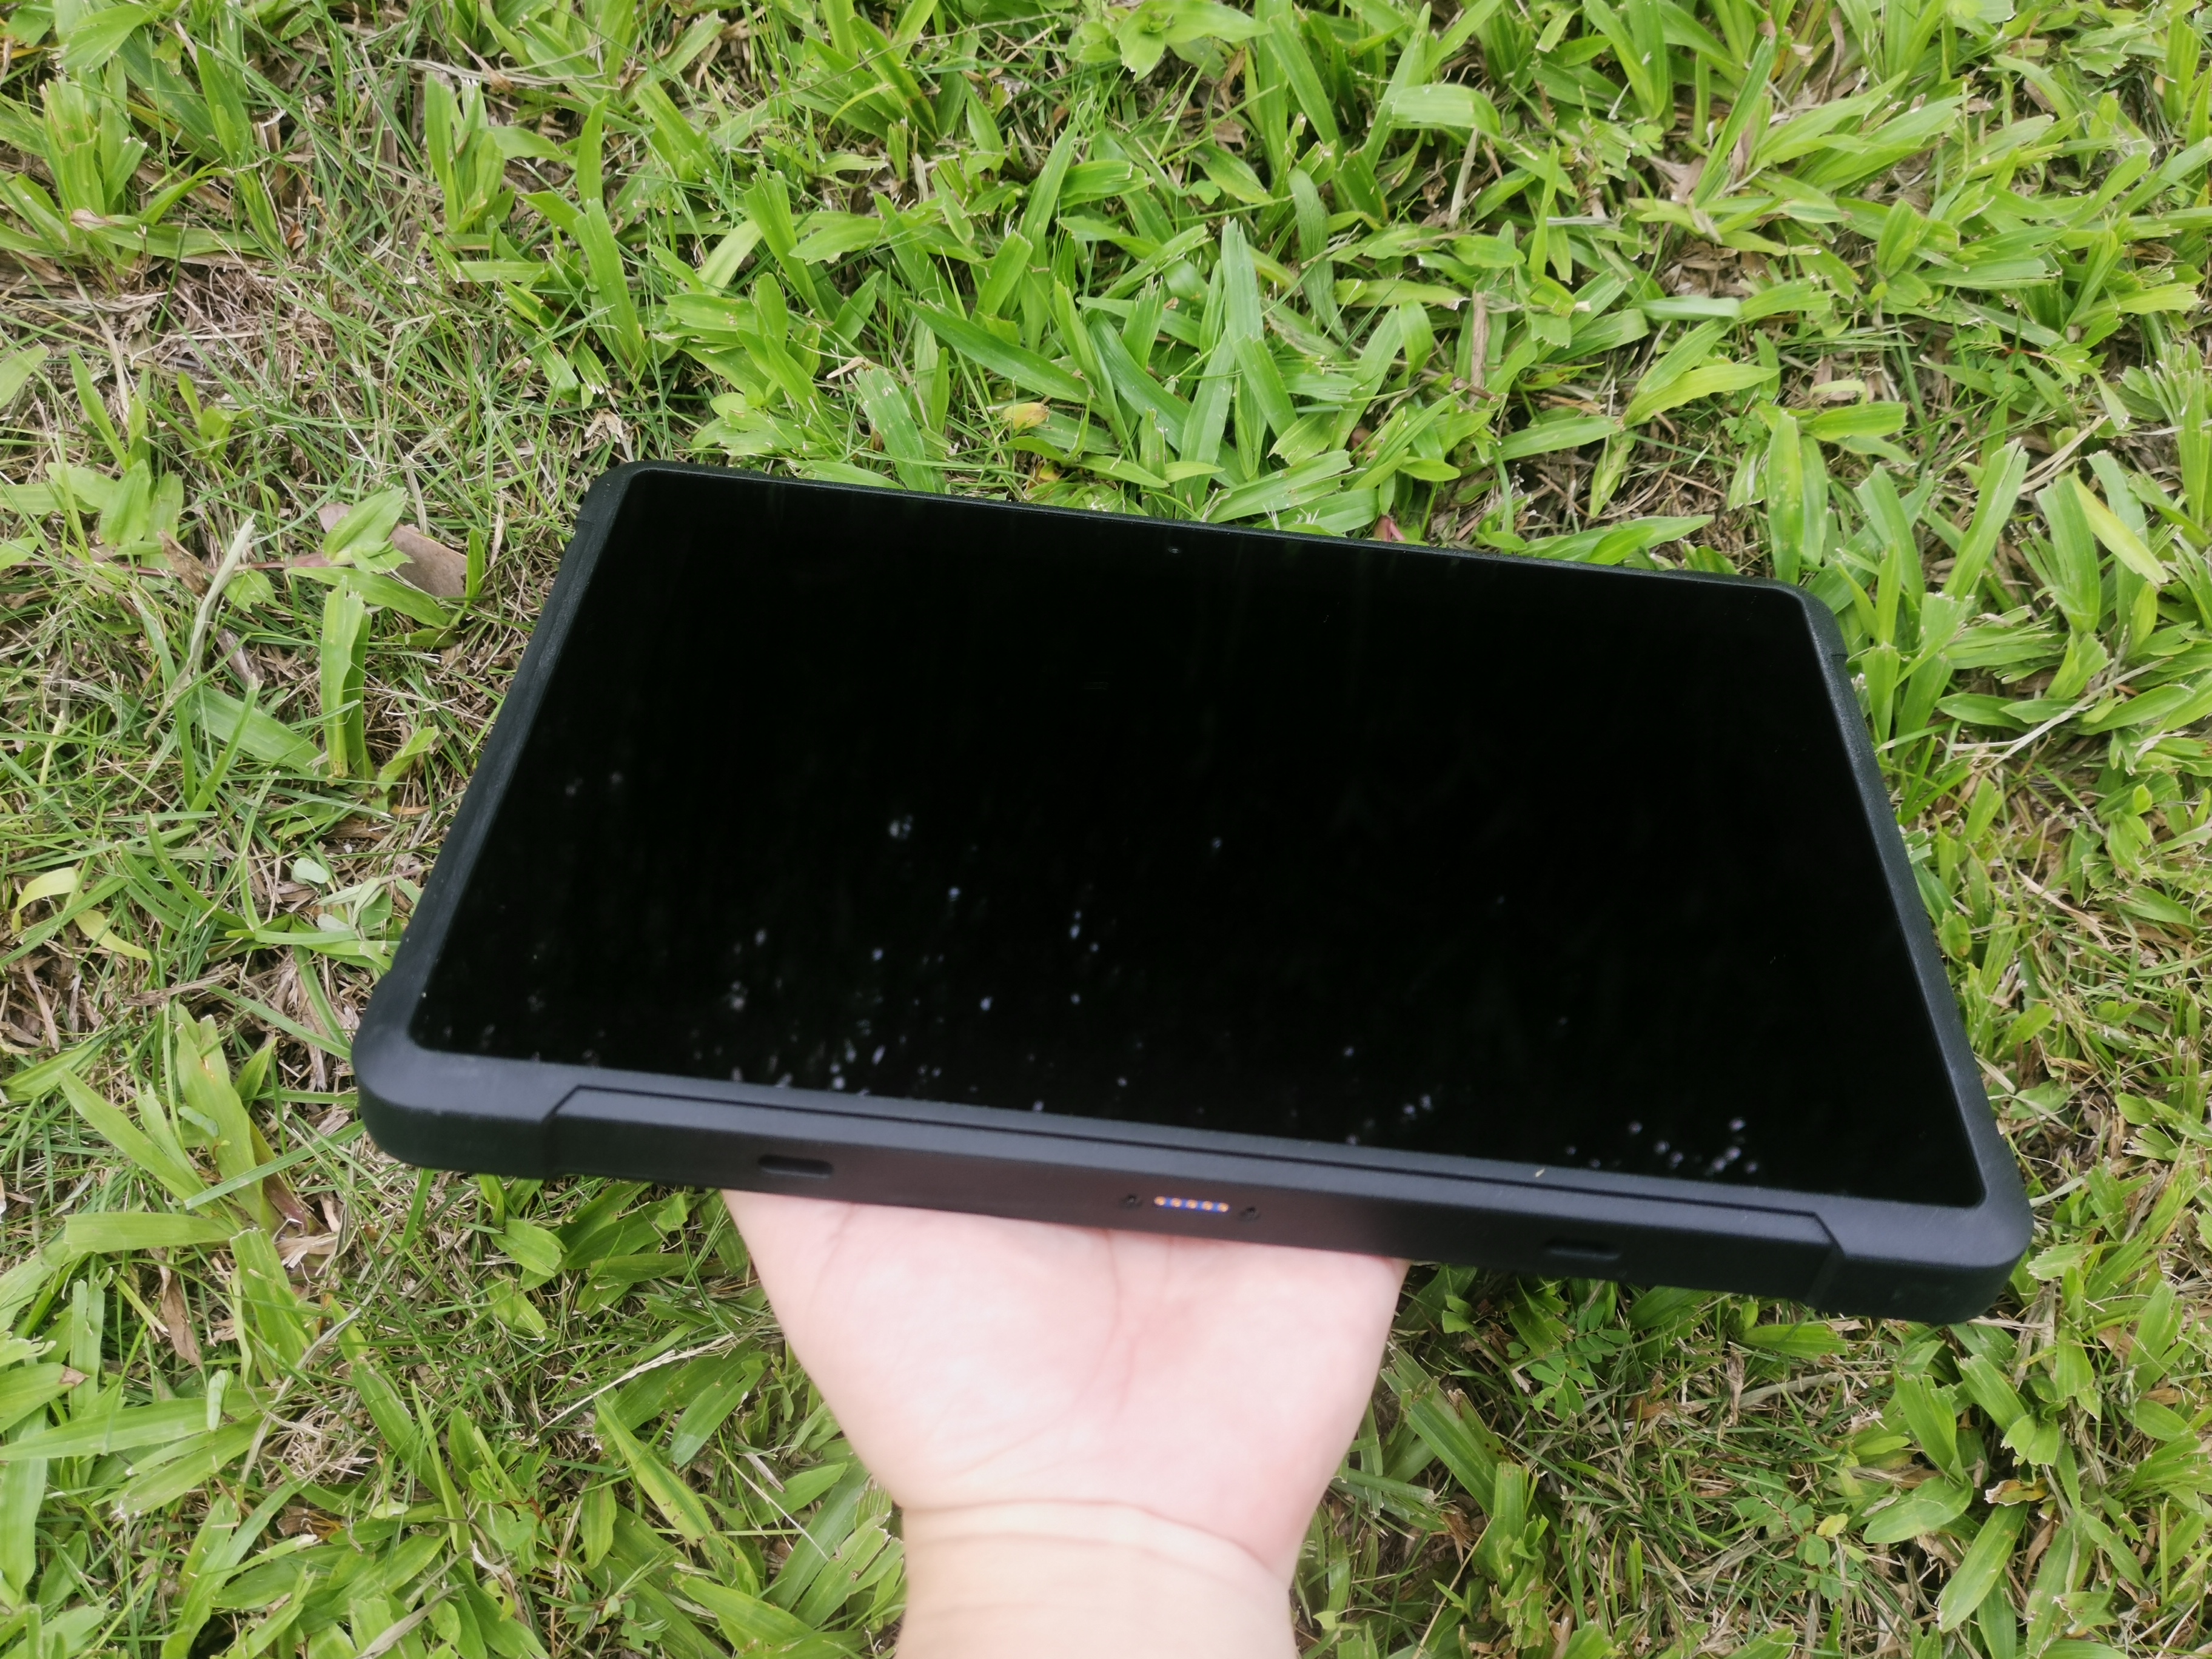 What are the advantages of reinforcing rugged tablets for industrial tablets?